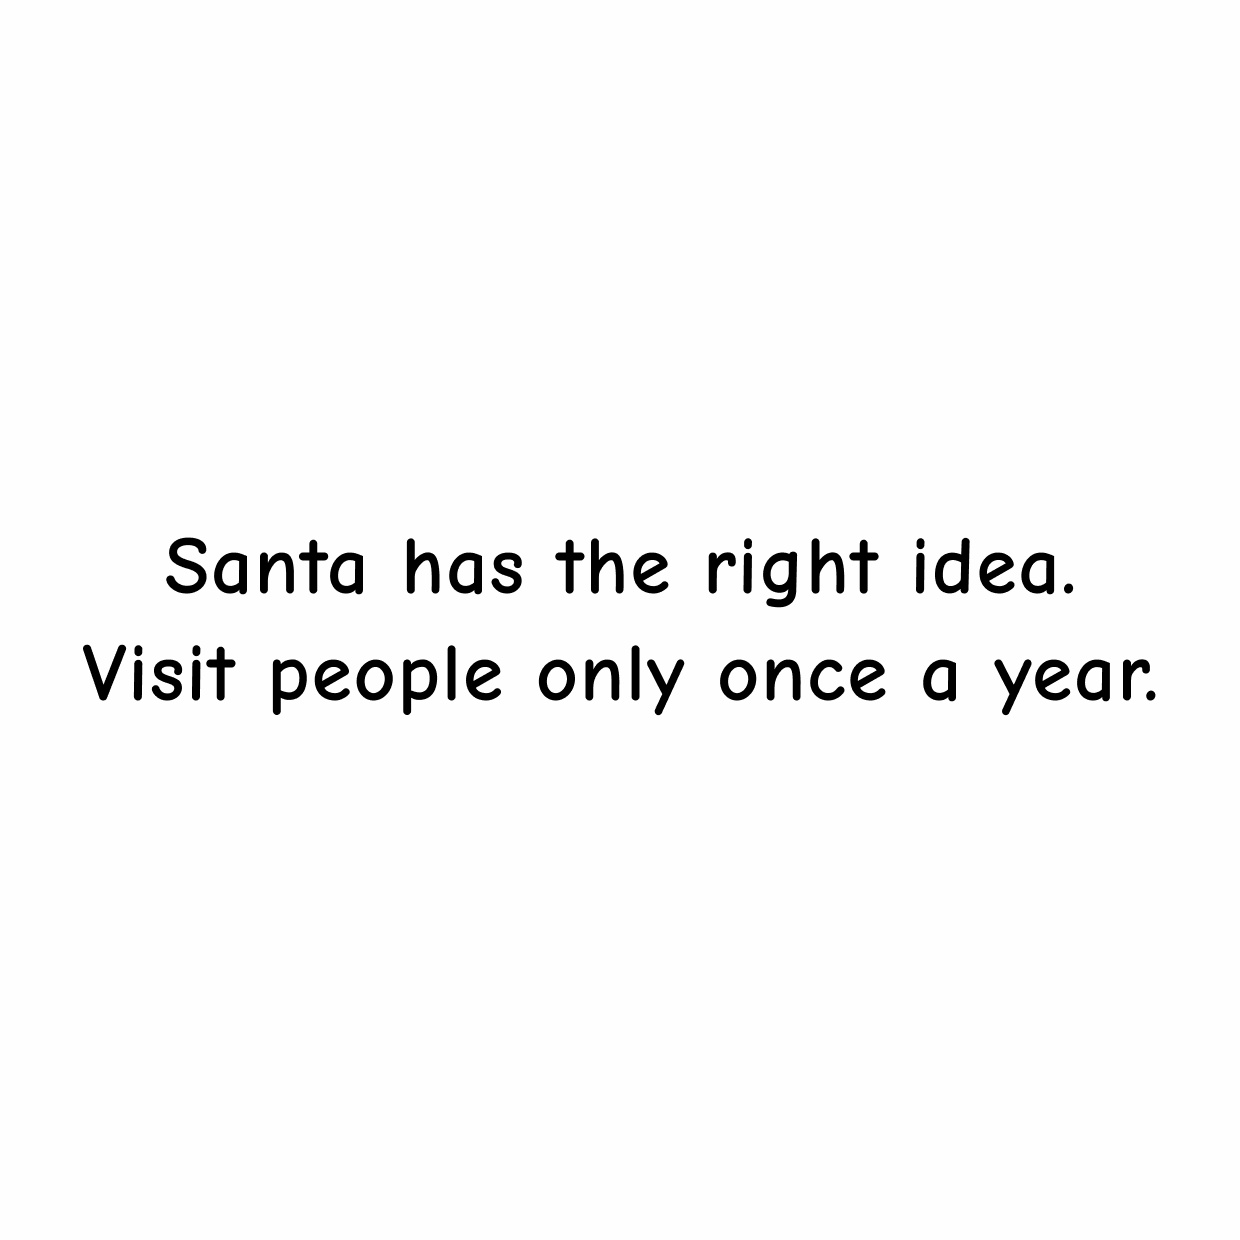 free christmas postcard santa has the right idea preview image.